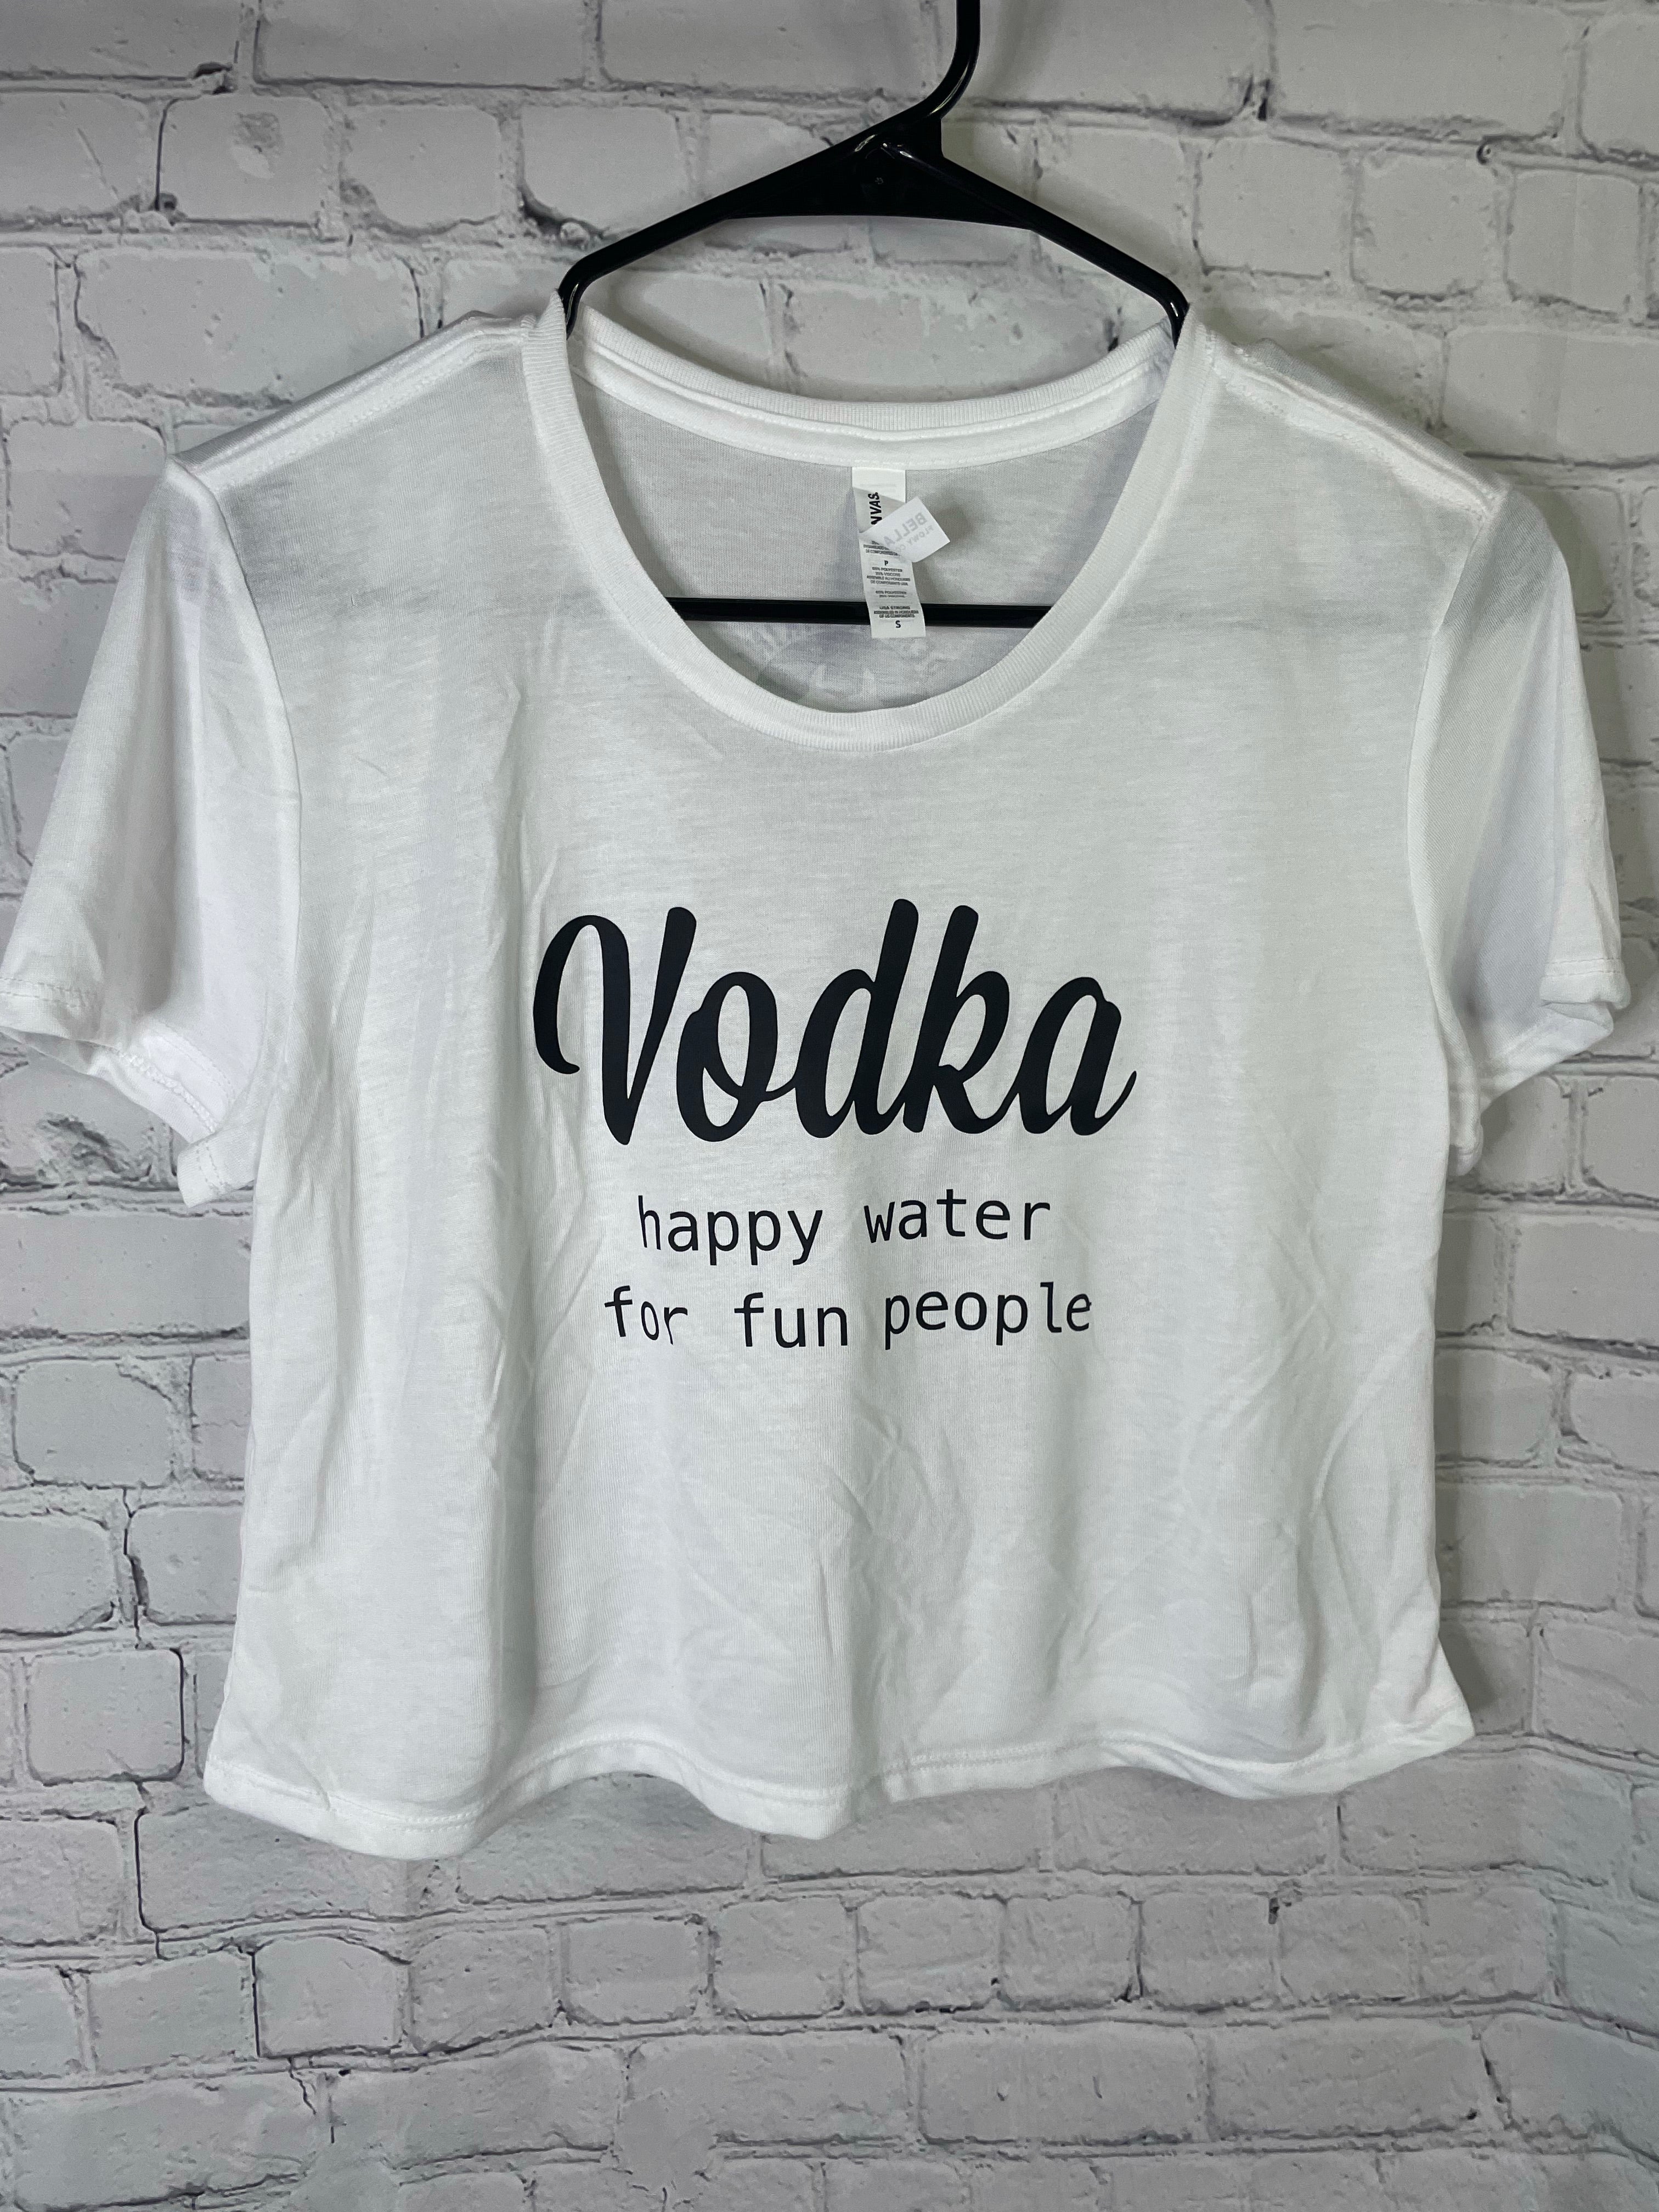 Vodka Happy Water For Fun People